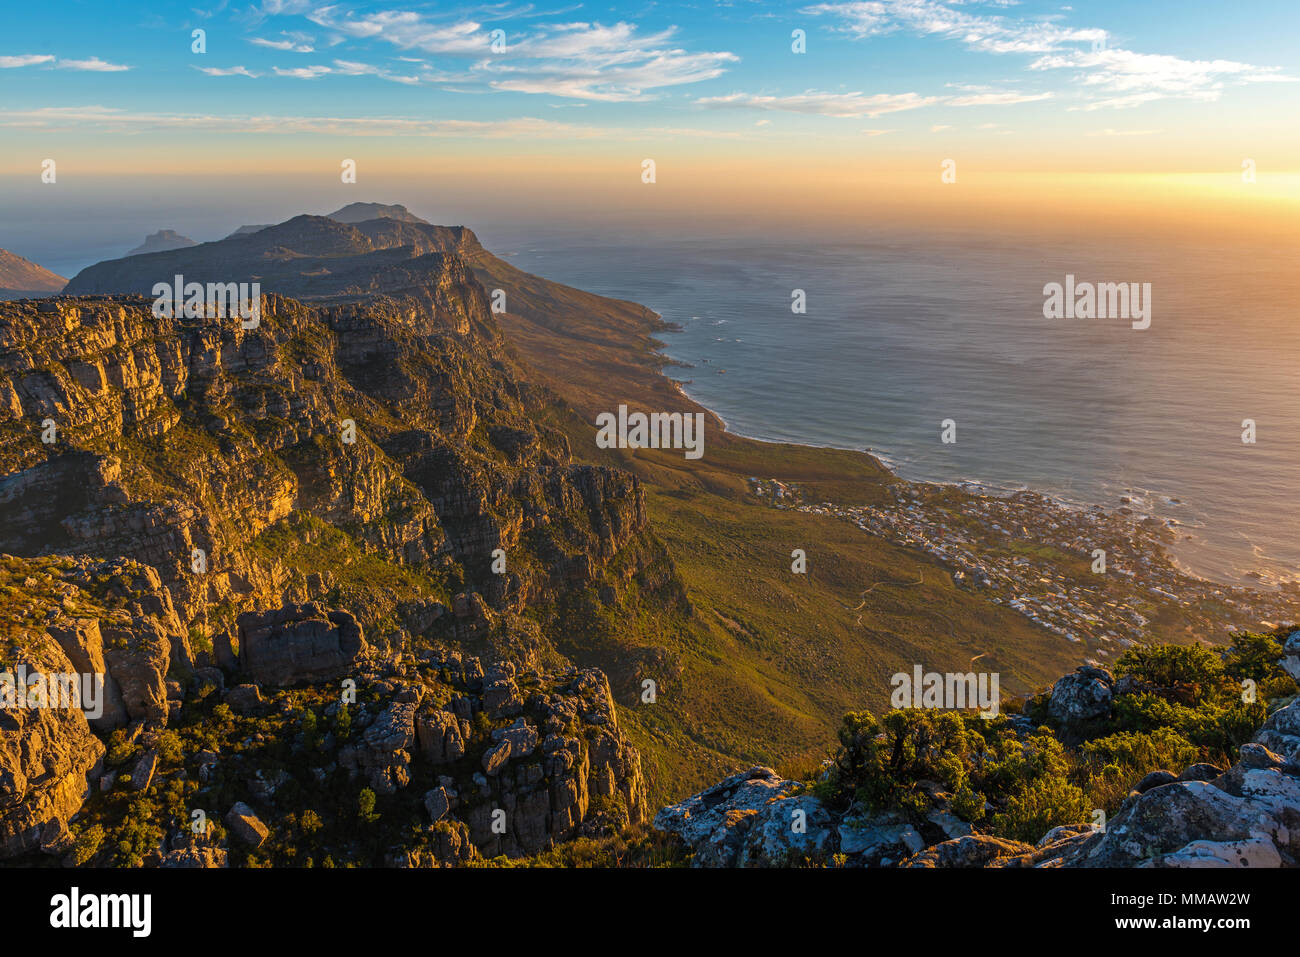 Aerial view of Cape Town's cityscape at sunset seen from the Table Mountain national park giving a sense of infinity, South Africa. Stock Photo